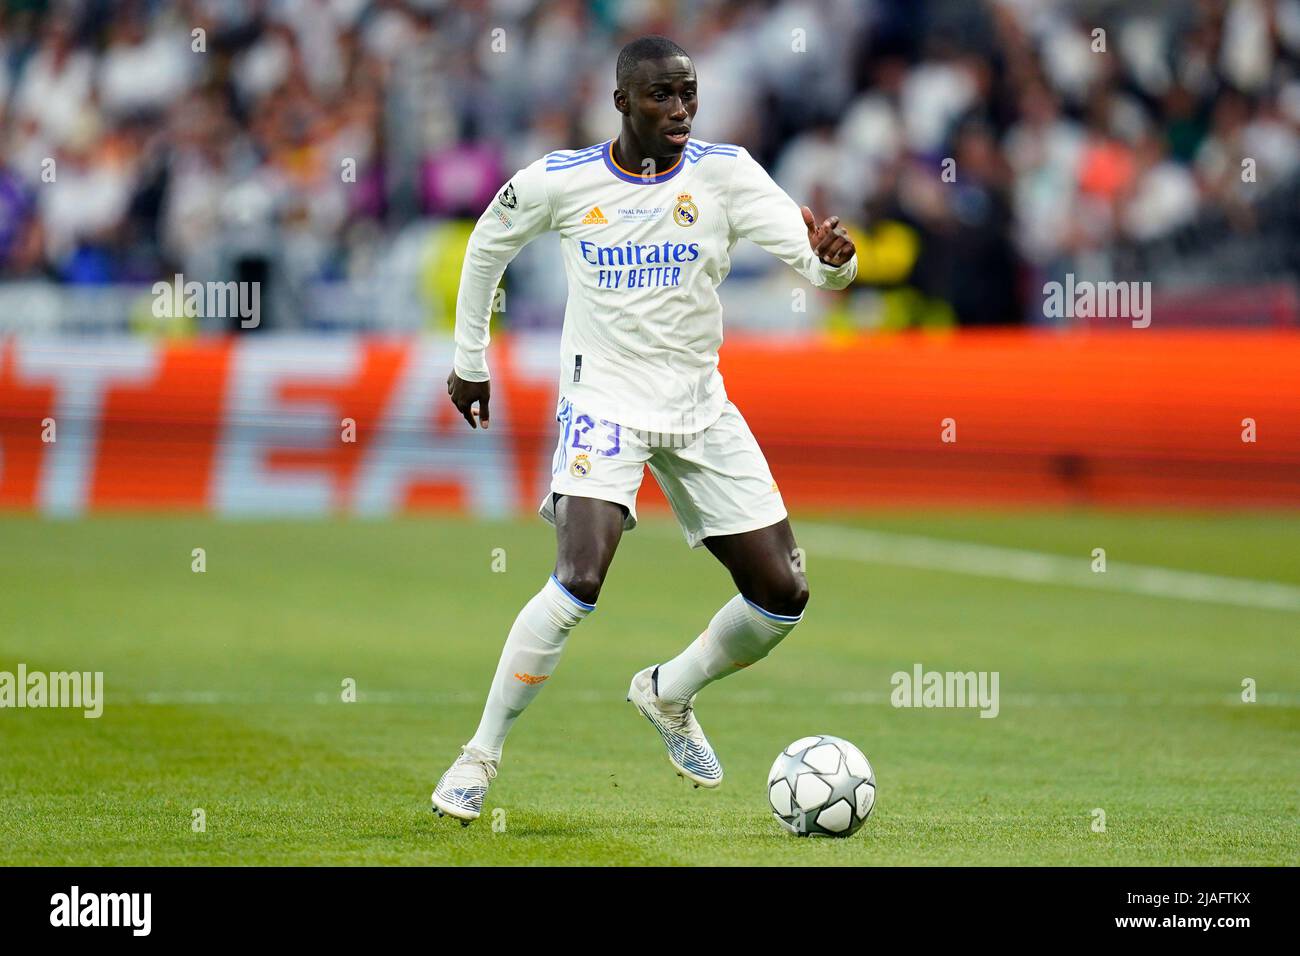 Ferland Mendy of Real Madrid during the UEFA Champions League Final match between Liverpool FC and Real Madrid played at Stade de France on May 28, 2022 in Paris, France. (Photo / Magma) Stock Photo